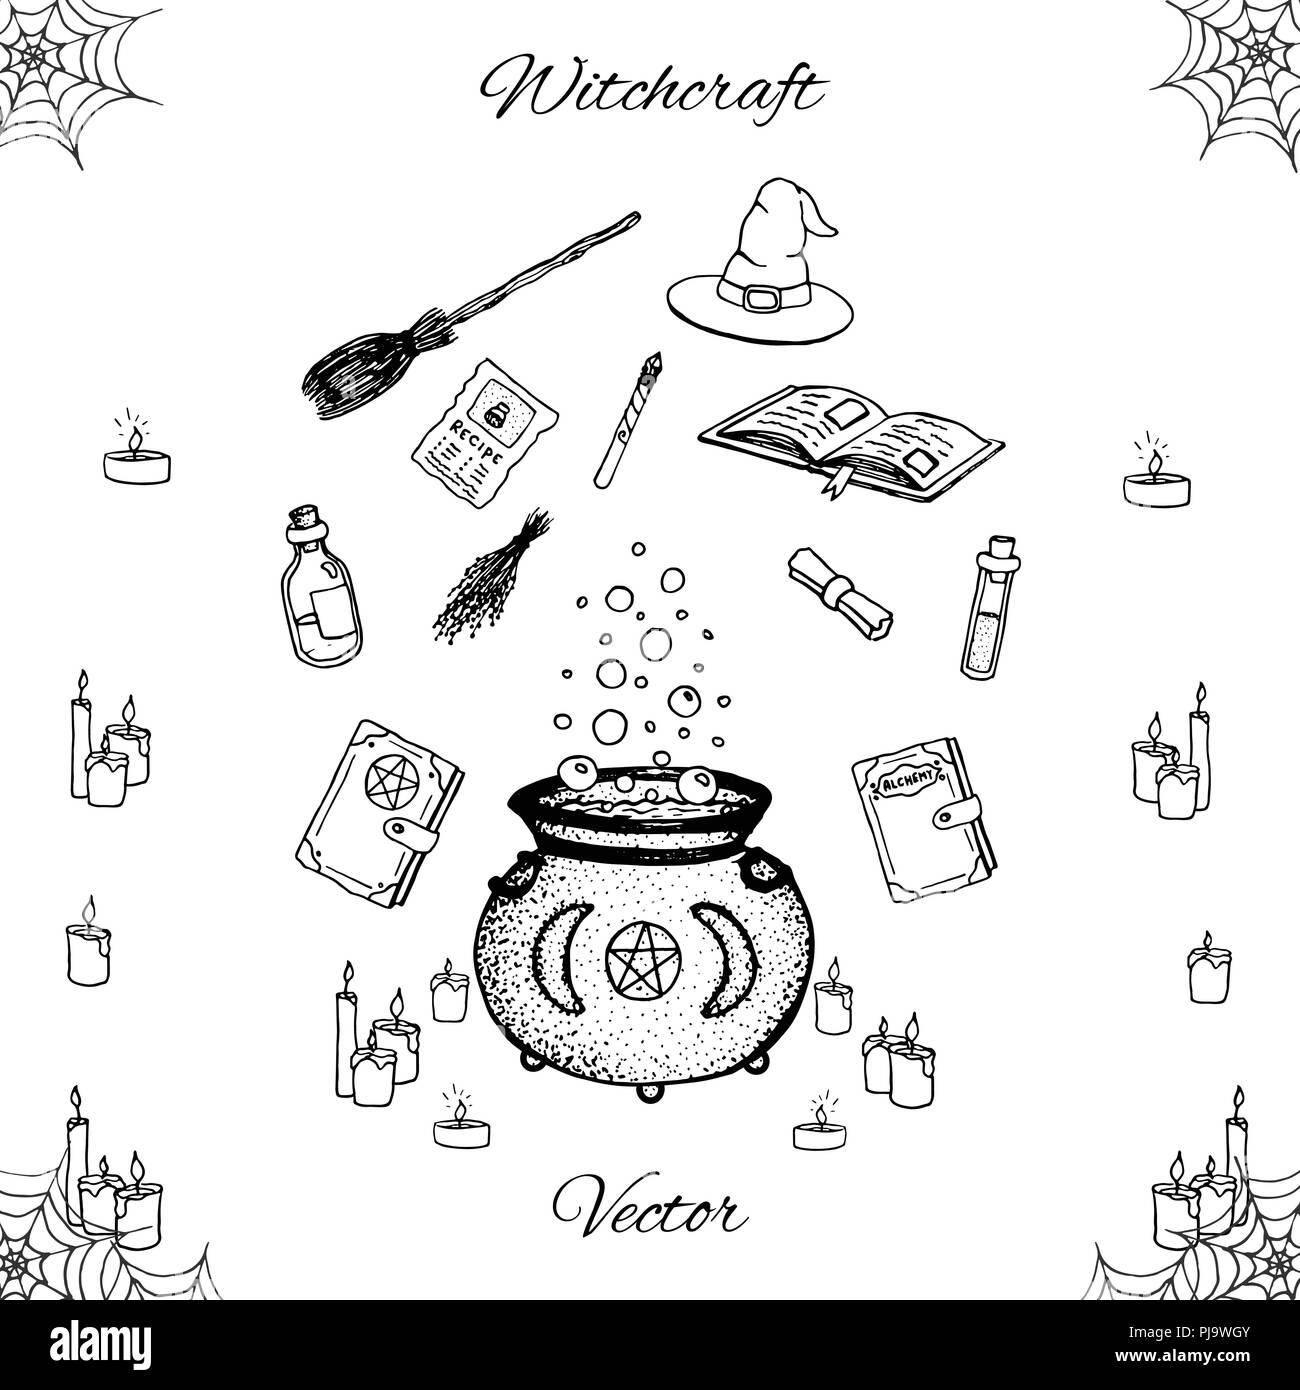 Hand drawn vector witchcraft set isolated on white background. Includes